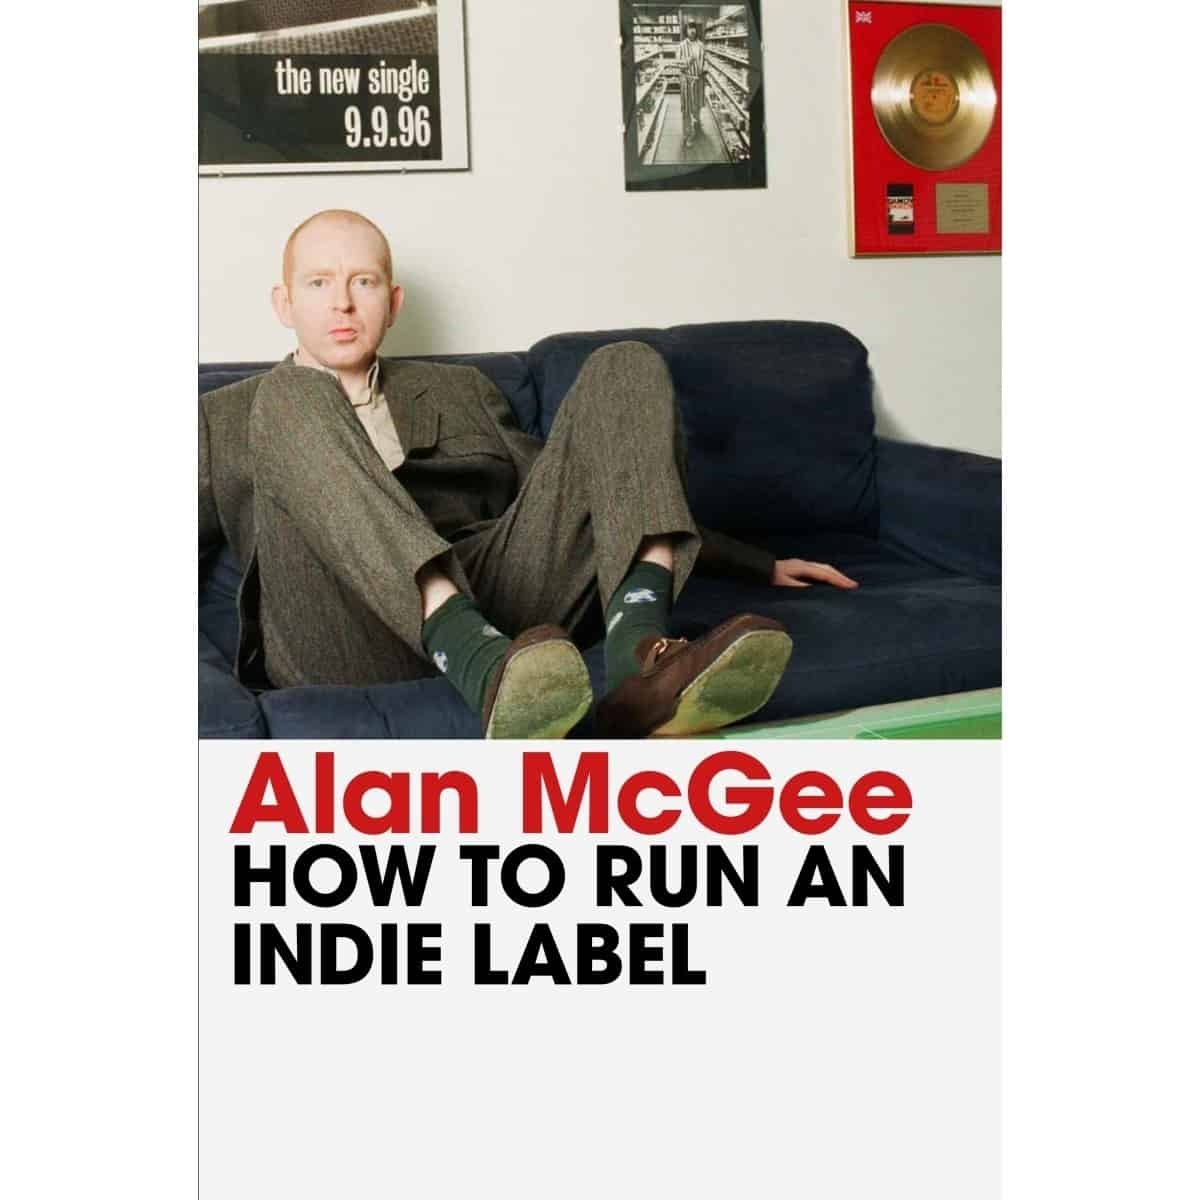 Atlantic Books Alan McGee - How to Run an Indie Label (SIGNED COPIES)